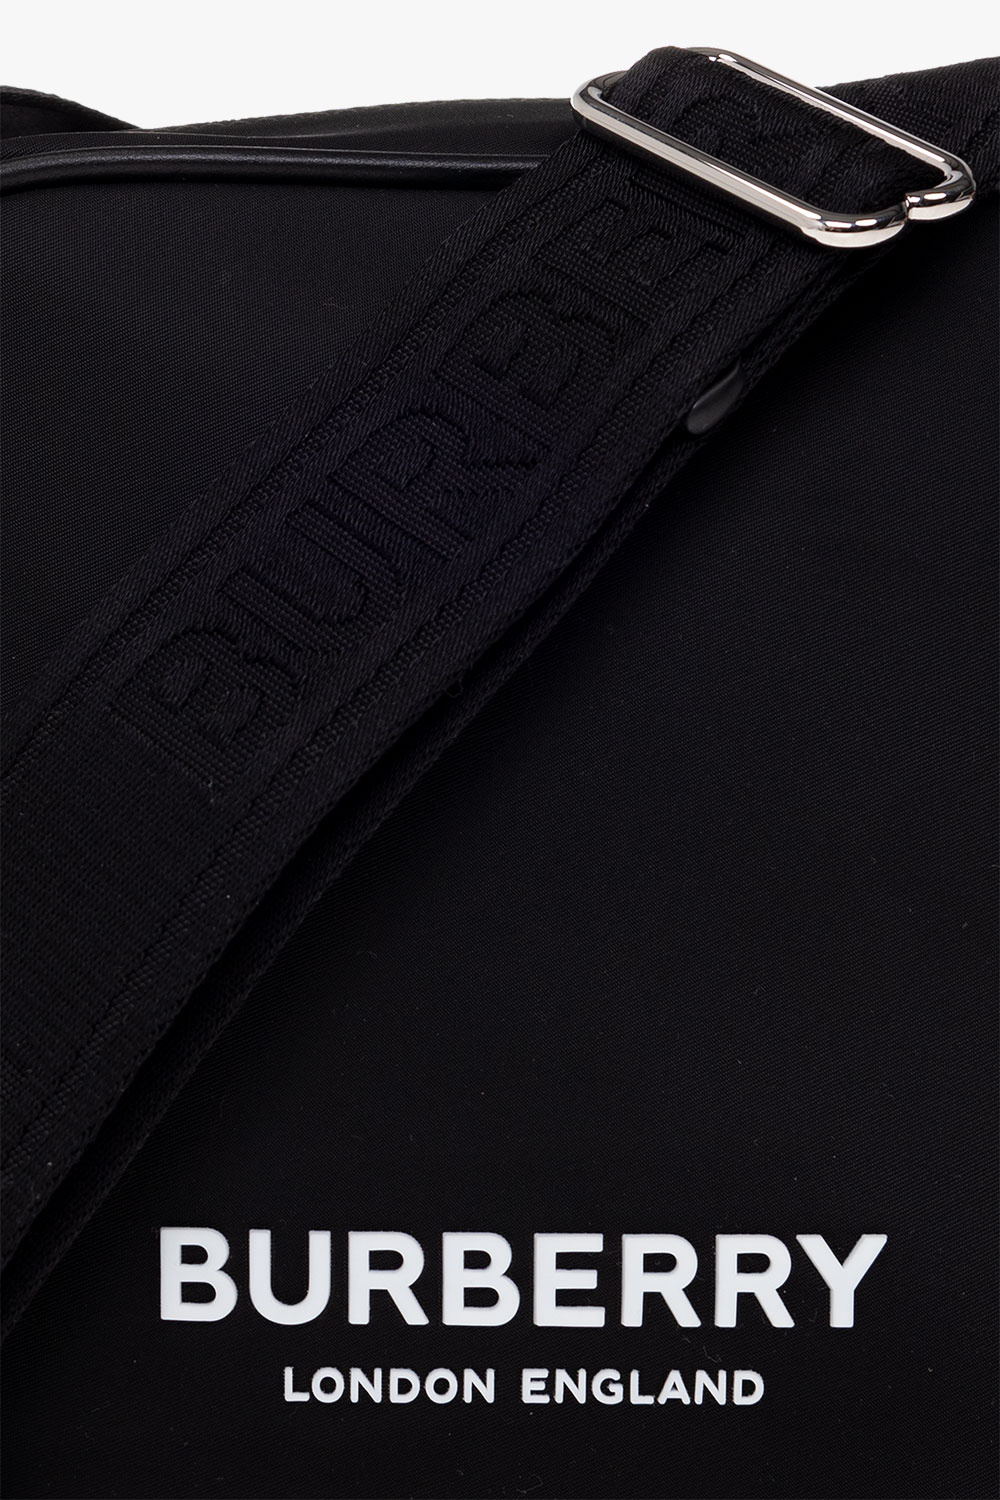 burberry Sweater ‘Square Paddy’ shoulder bag